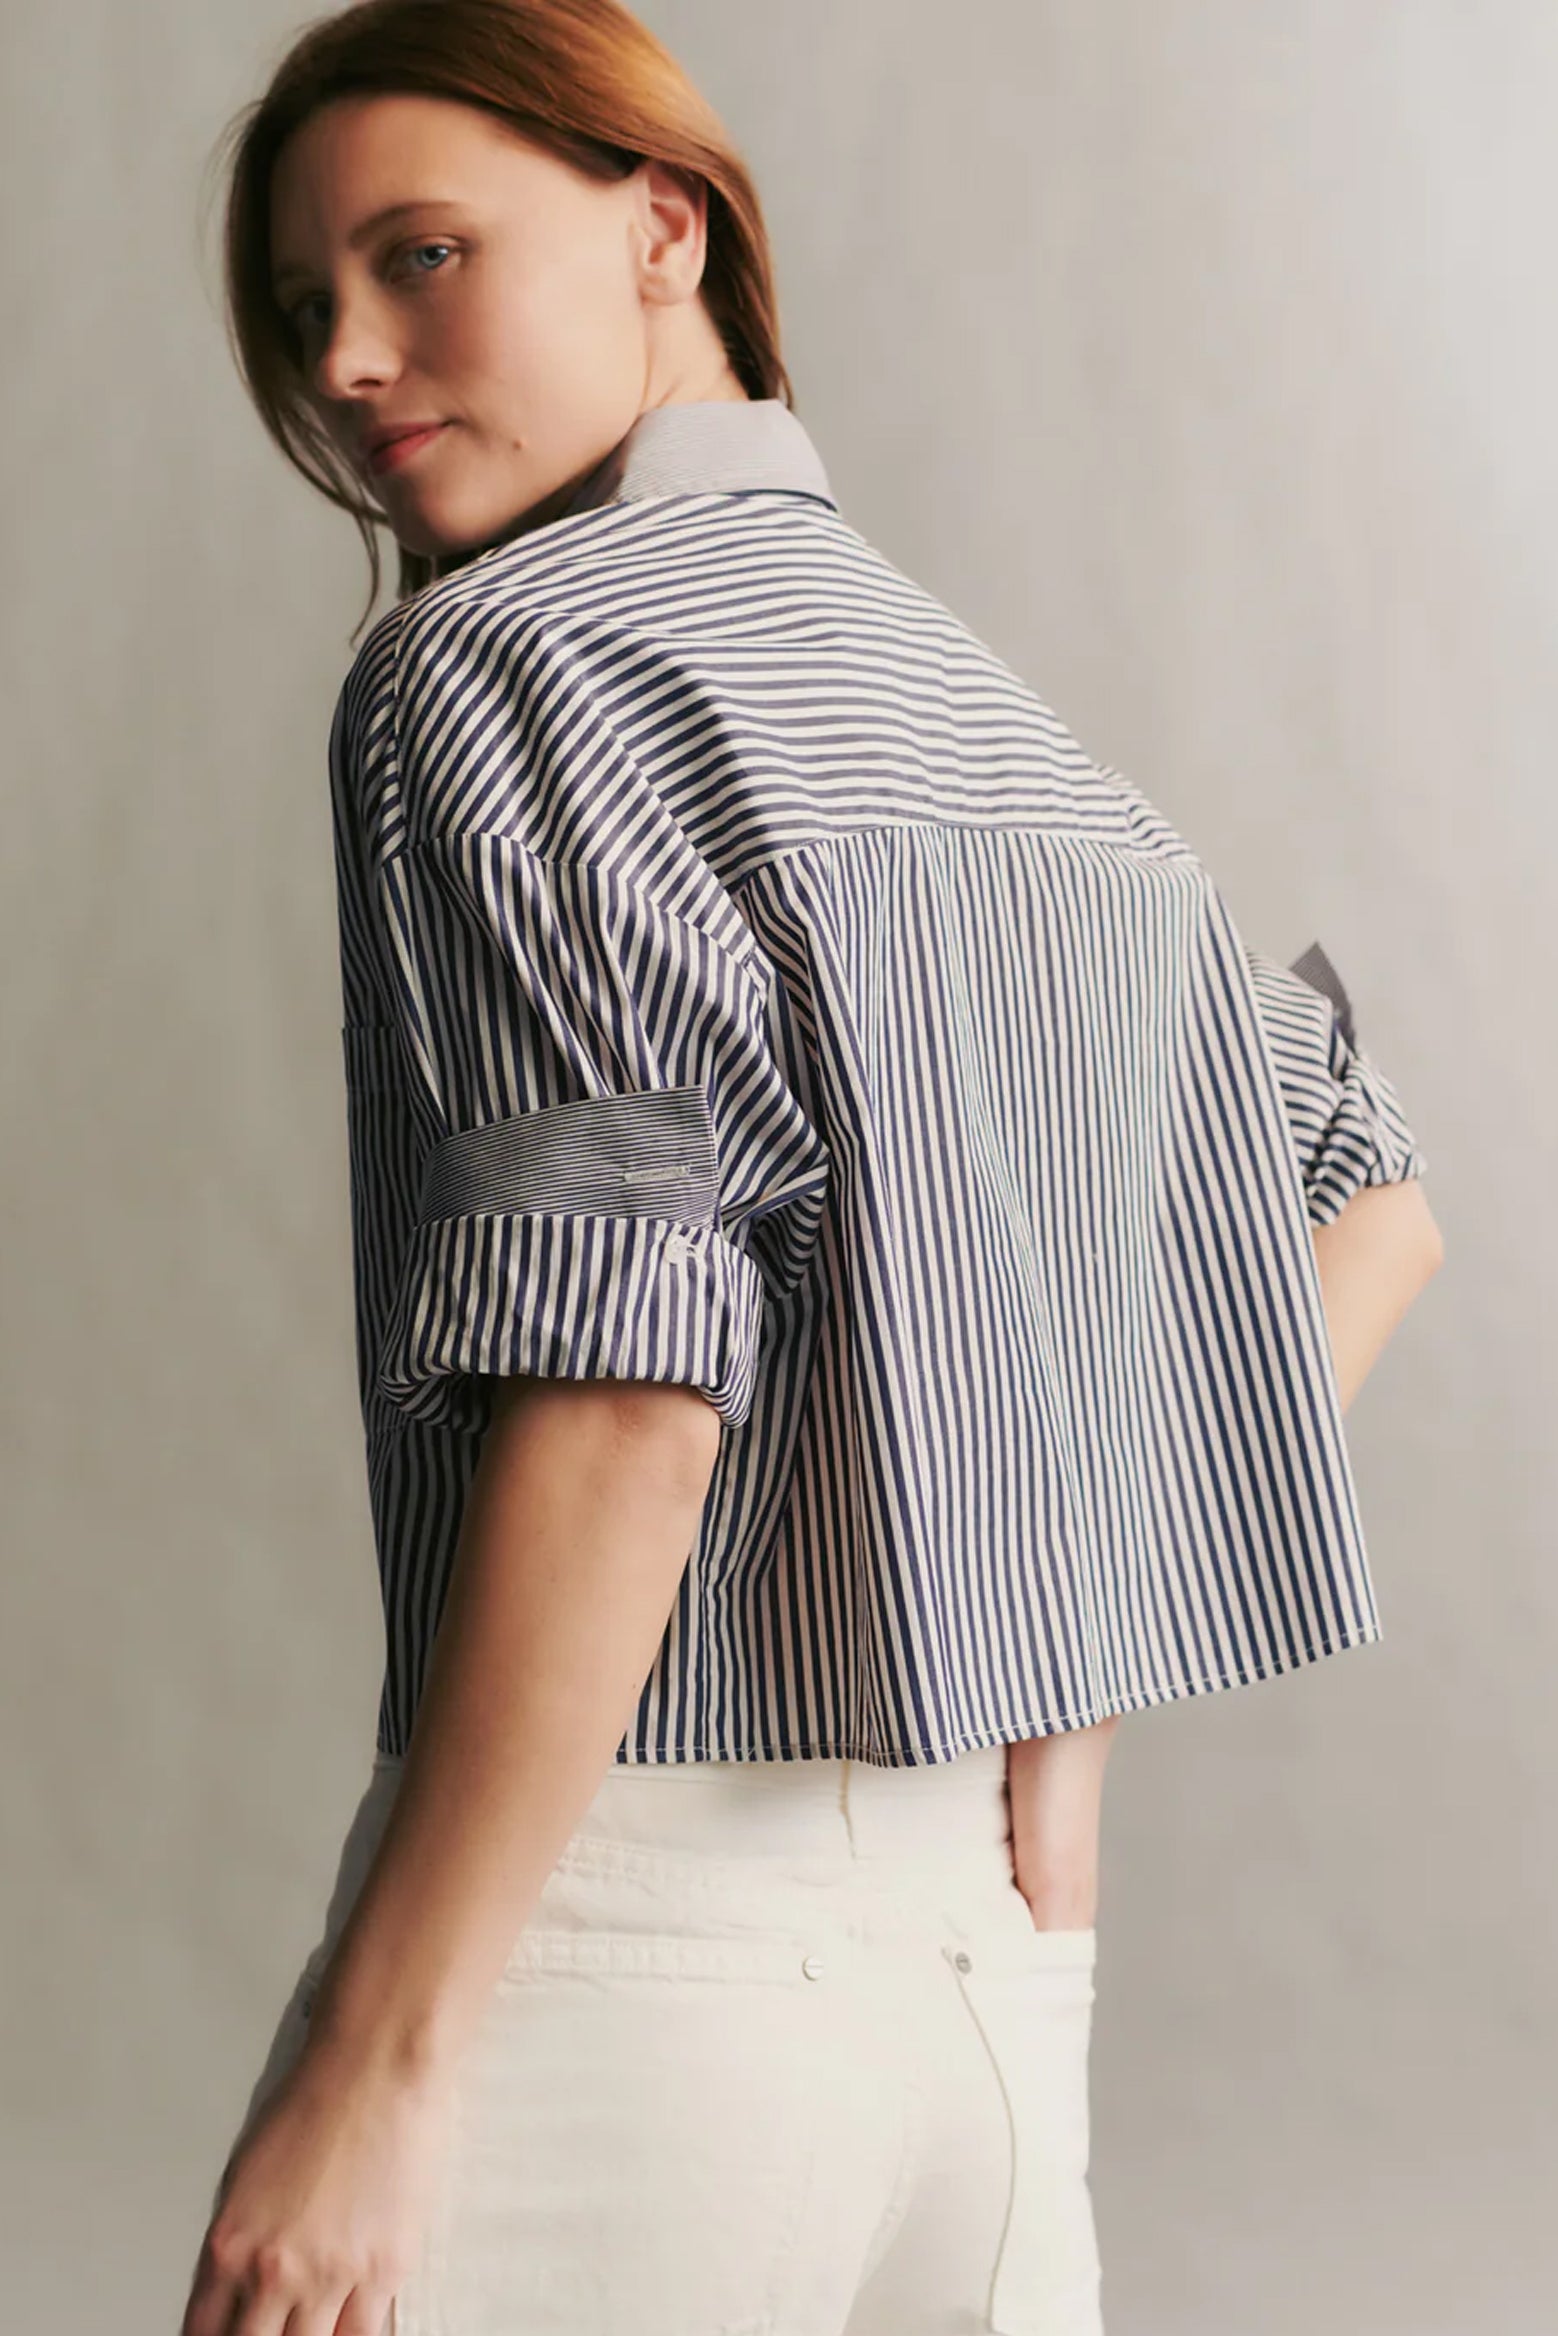 TWP Next Ex Shirt in White/Midnight available at The New Trend Australia.